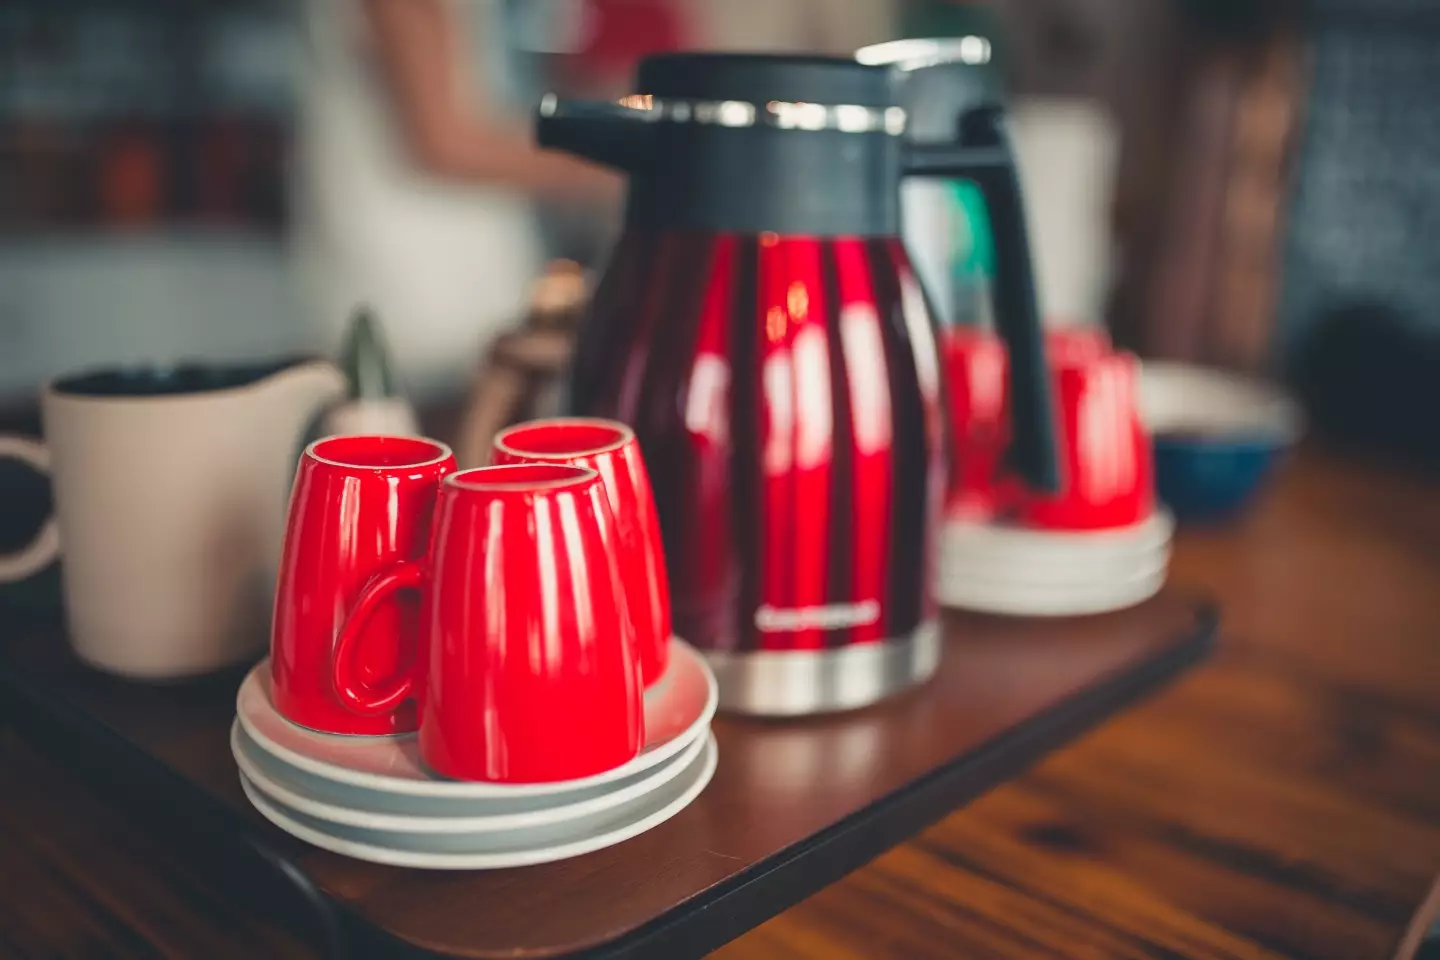 Kettles are amongst one of the worst things in an office kitchen for harbouring bacteria.